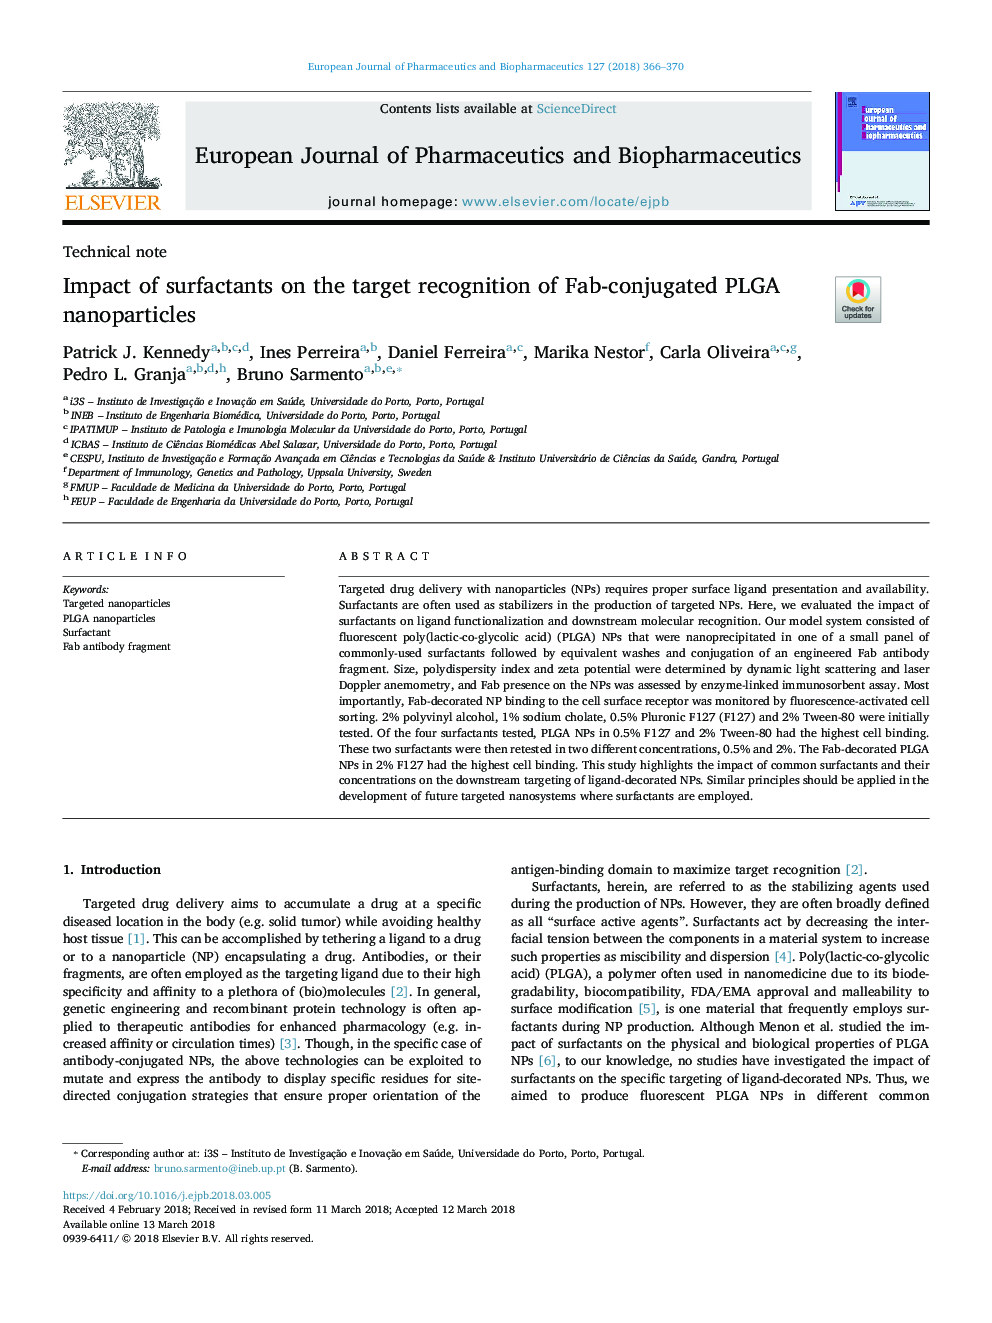 Impact of surfactants on the target recognition of Fab-conjugated PLGA nanoparticles